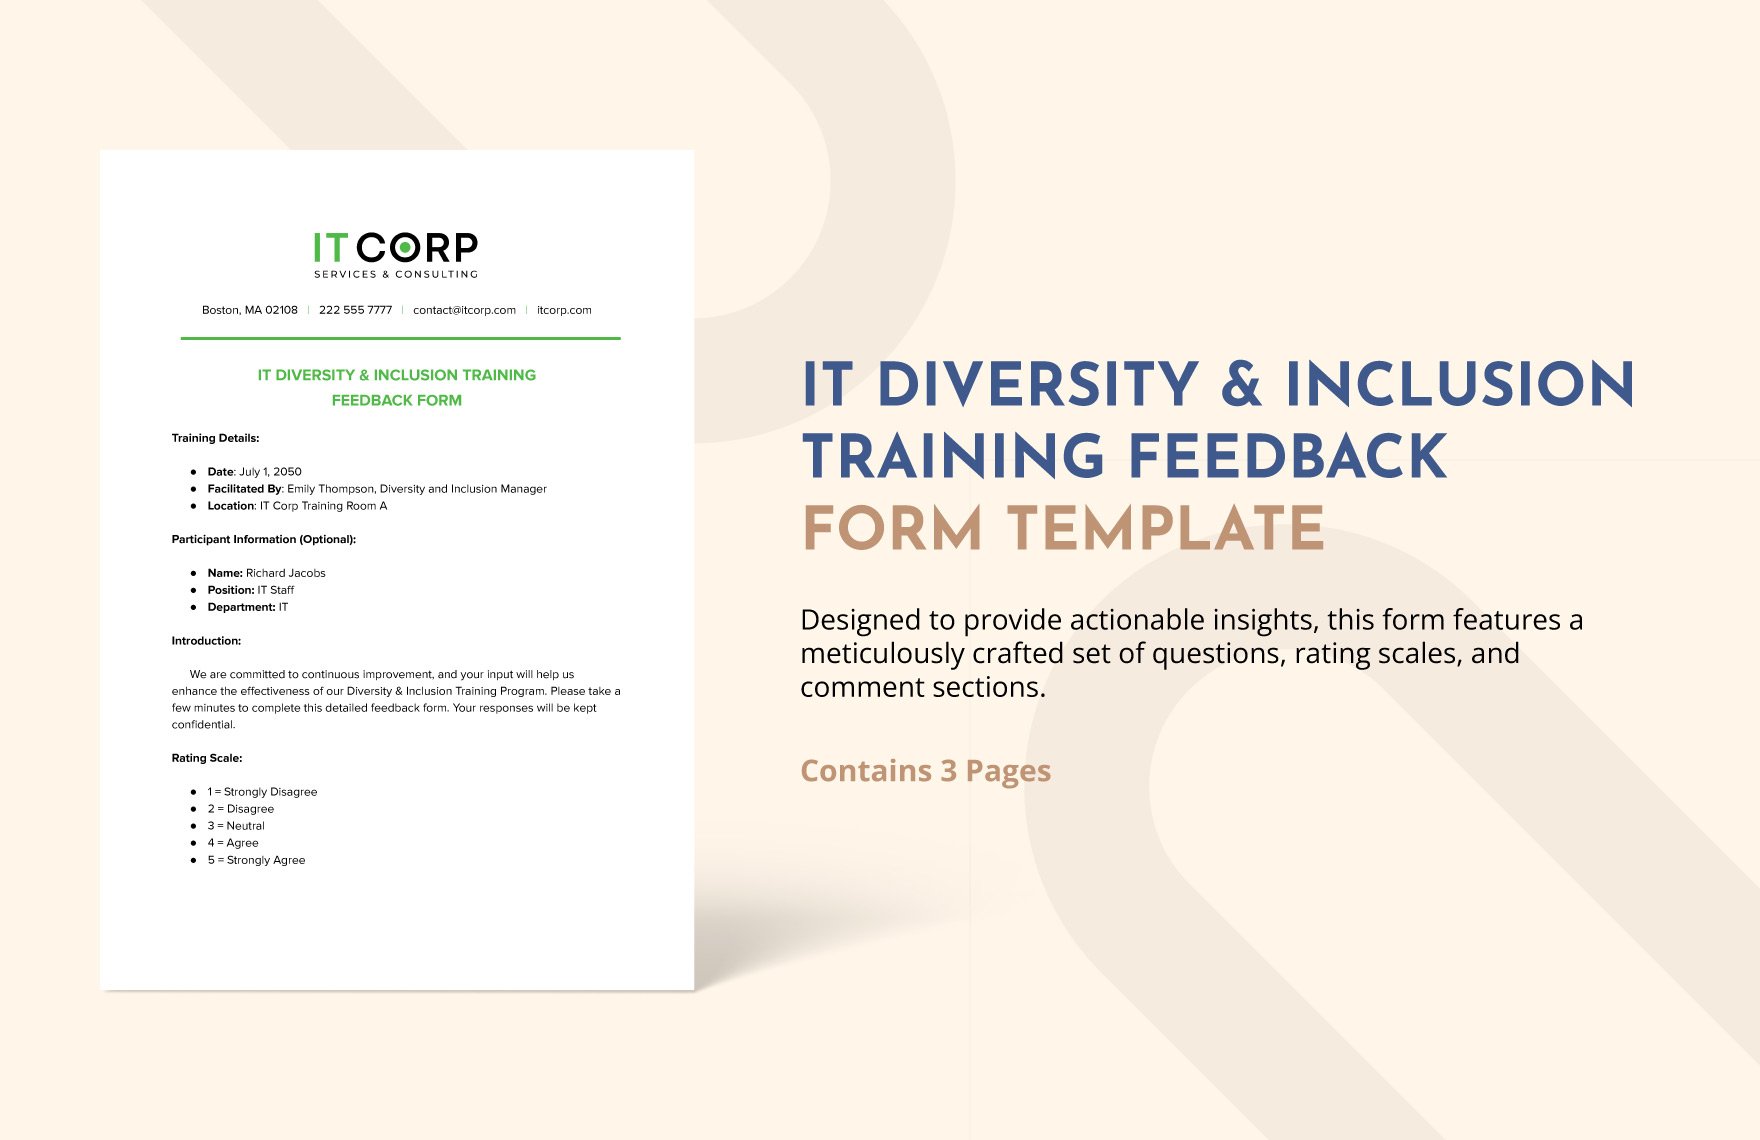 IT Diversity & Inclusion Training Feedback Form Template